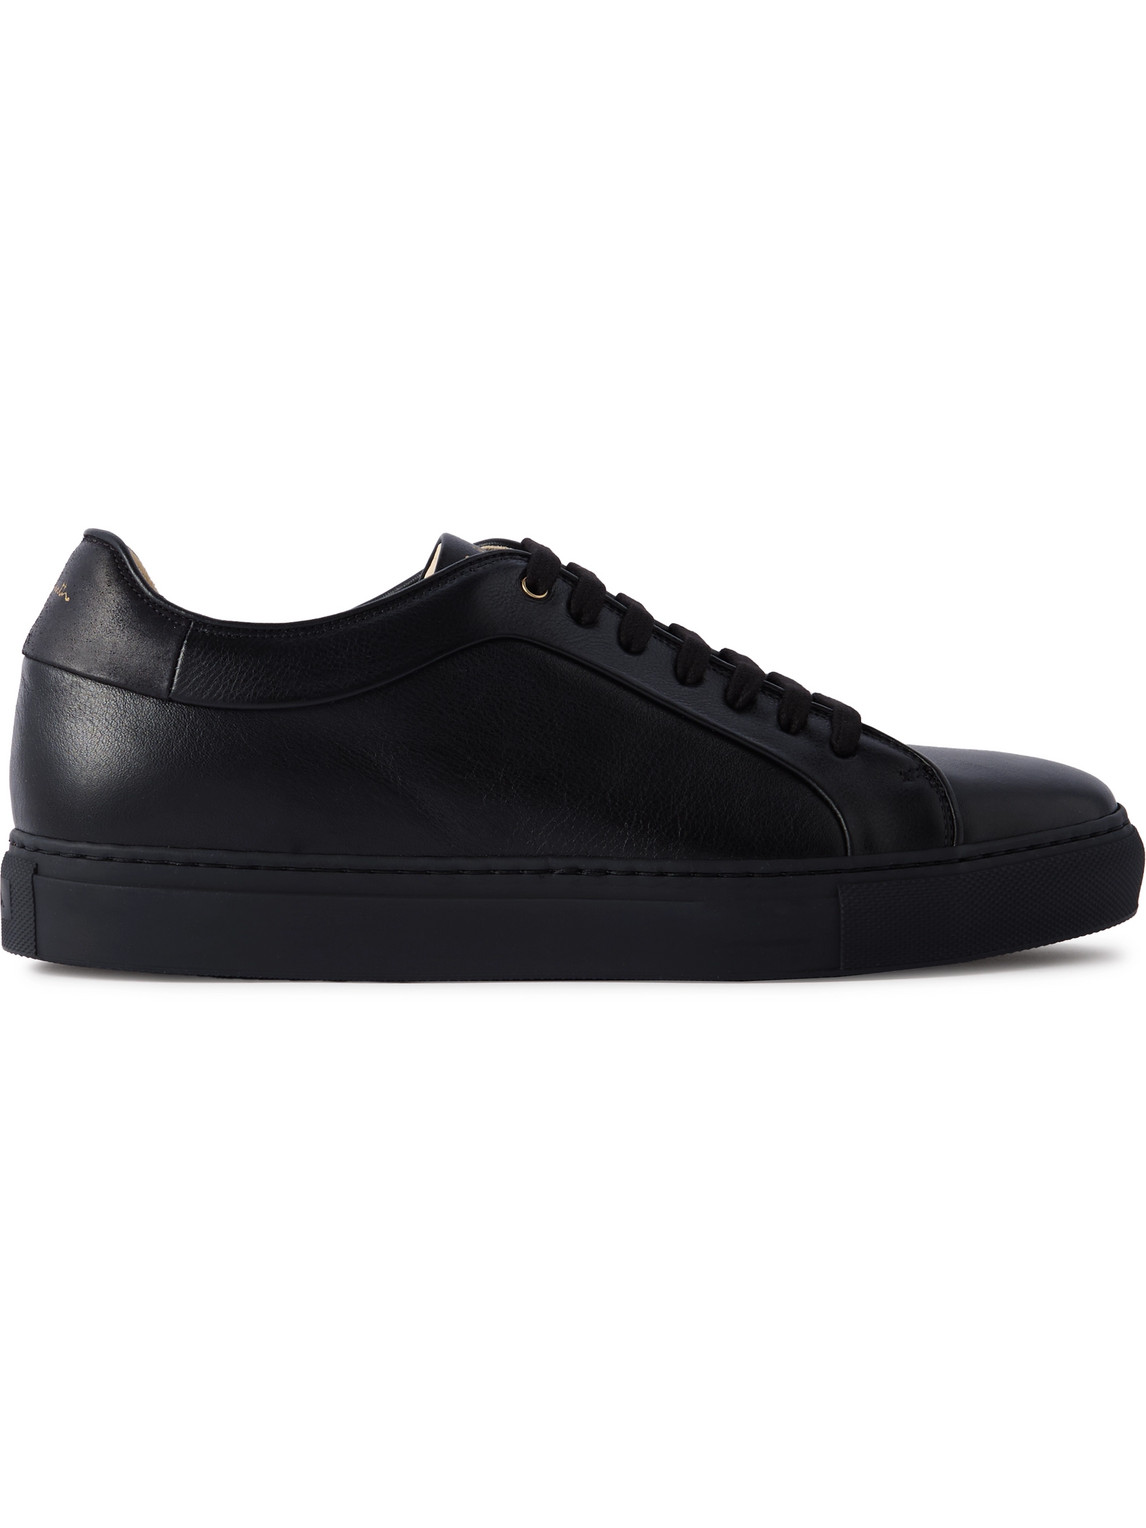 Paul Smith Basso Leather Sneakers In Black